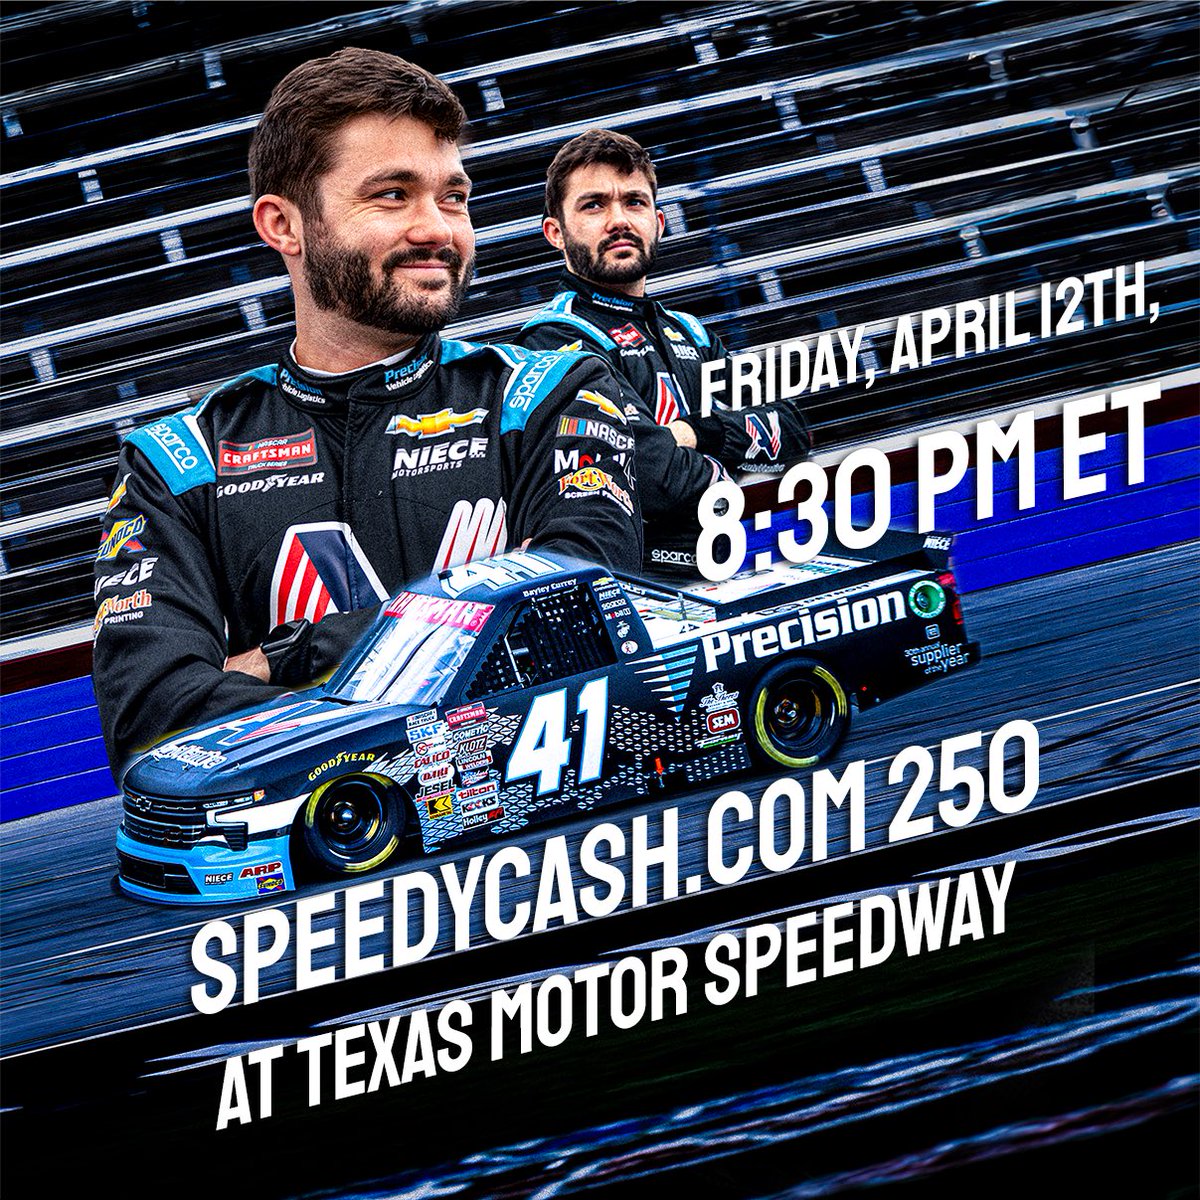 Race Day at @TXMotorSpeedway! we’ve been really fast at intermediates this year, so we are looking forward to putting a solid result on the board. @NieceMotorsport | @TeamChevy #NCTS #SpeedyCash250 #PressTheAttack